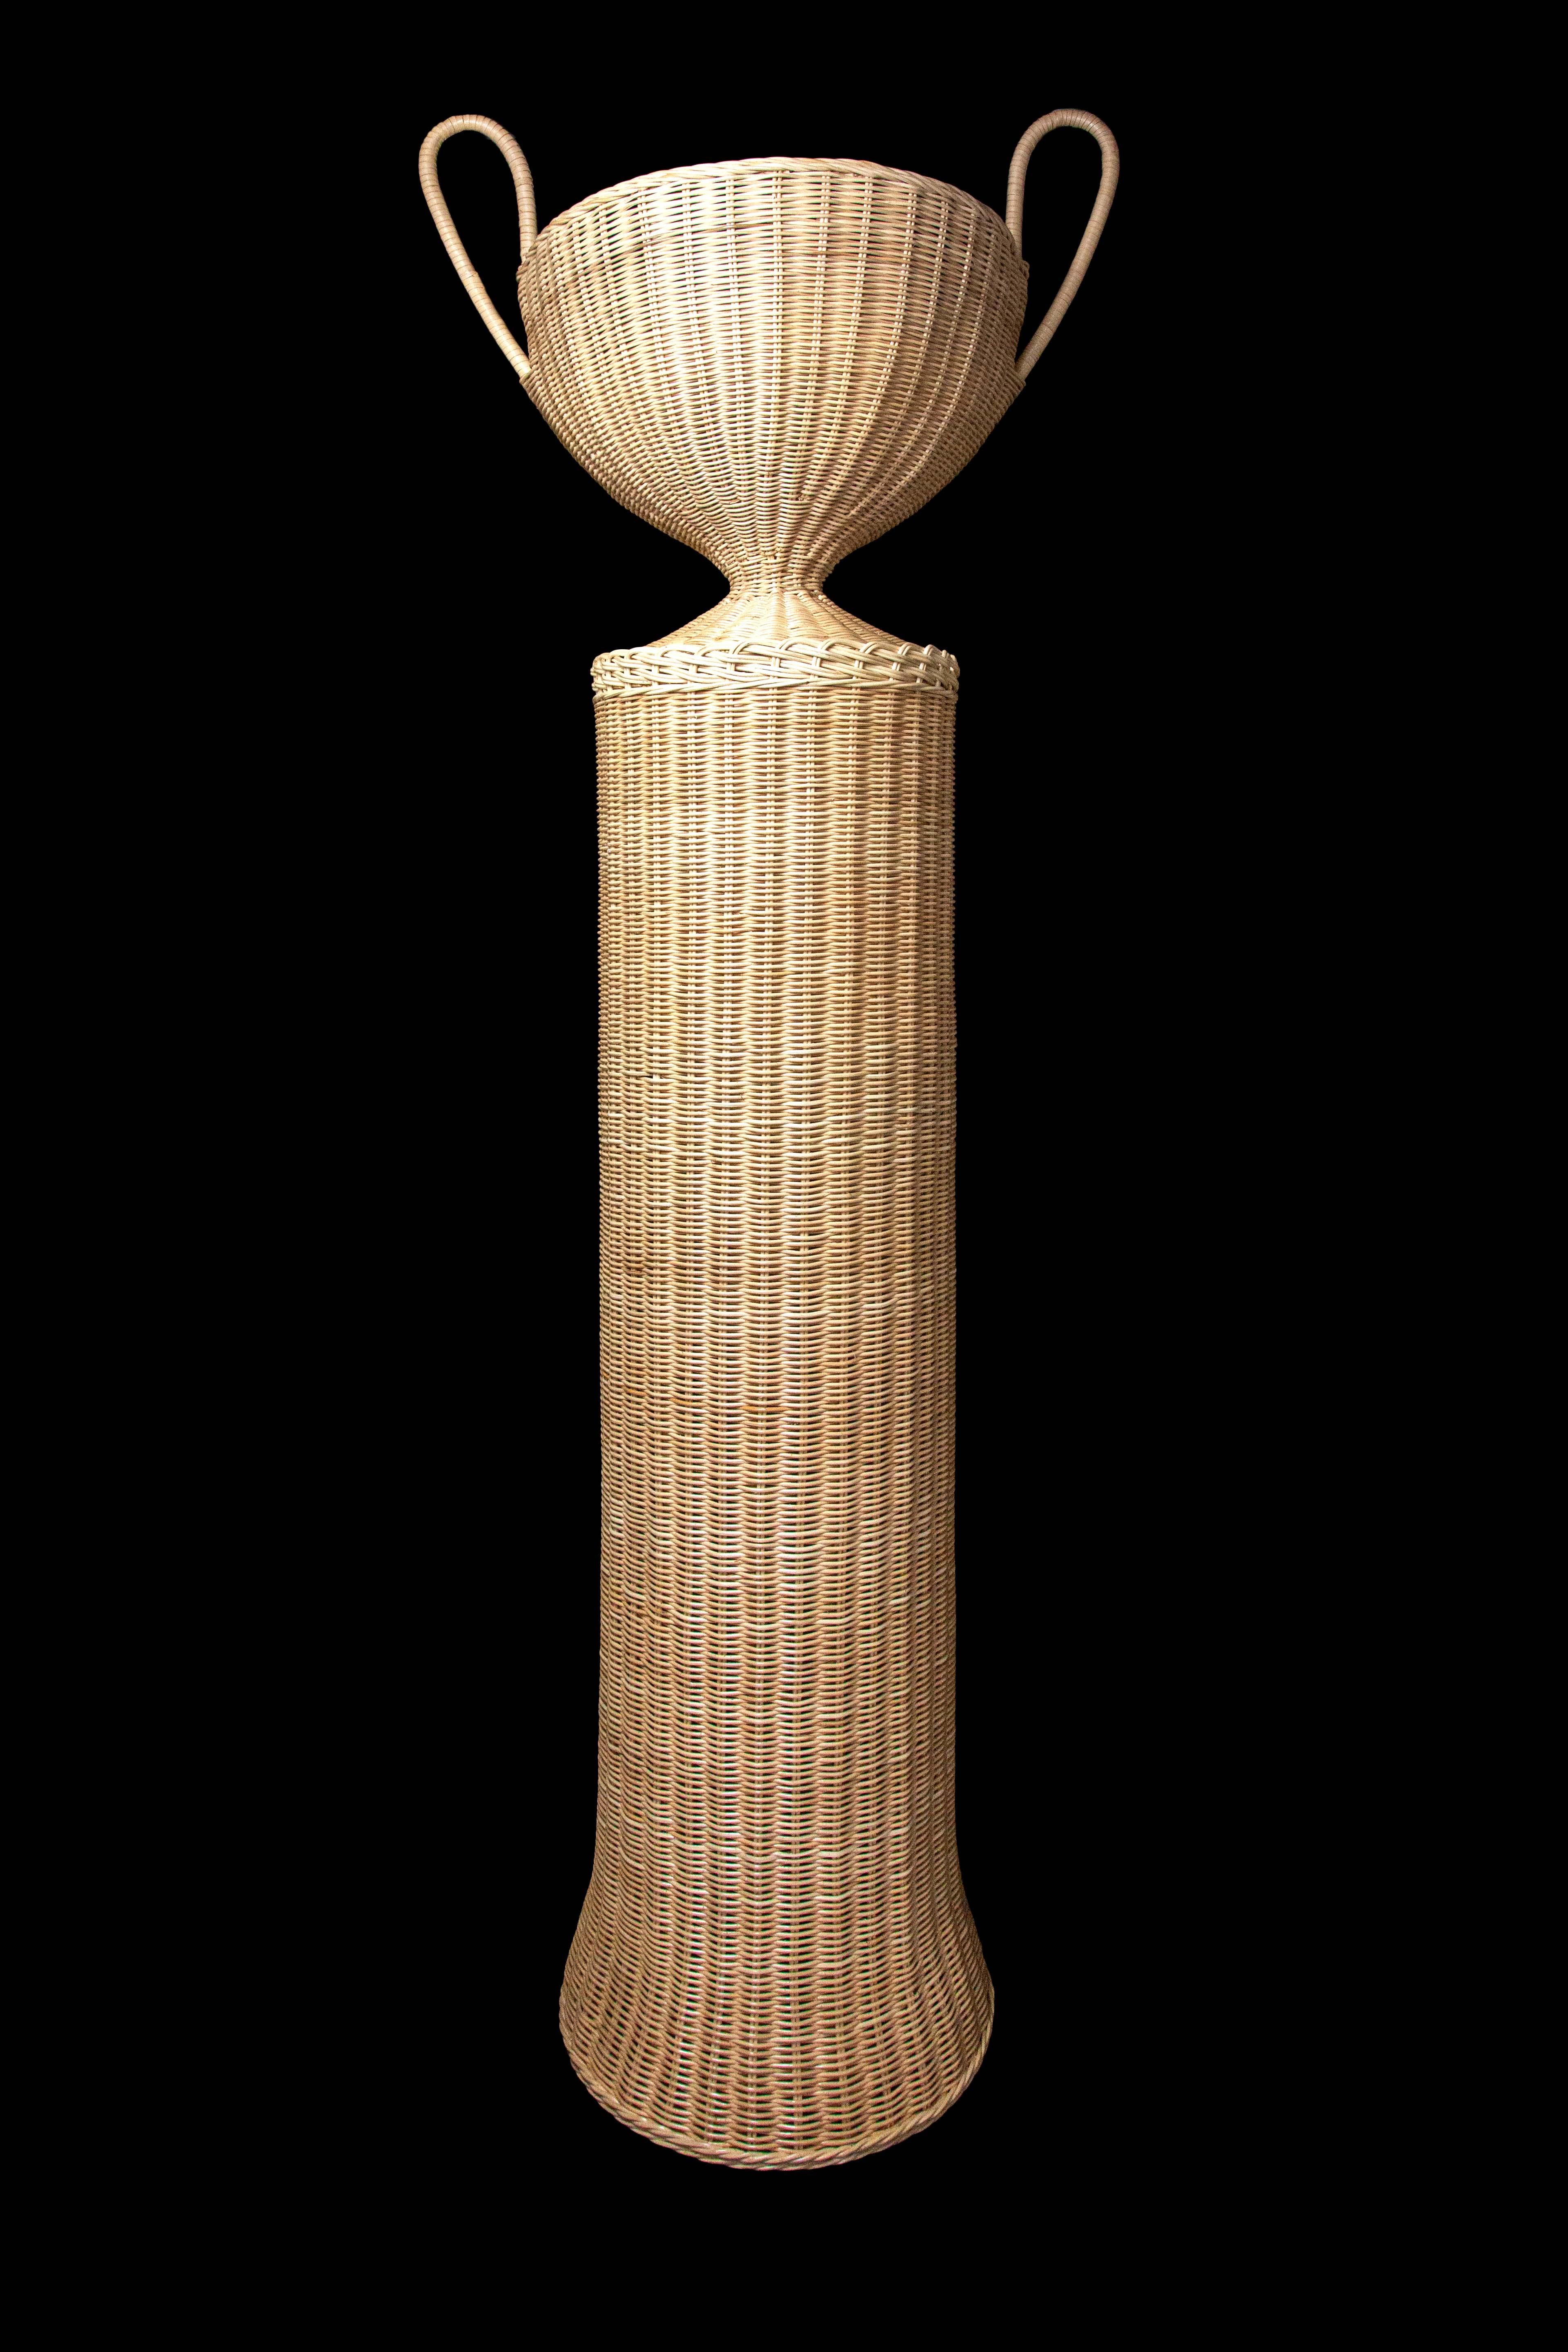 Creel and Gow Wicker (Rattan) pedestal with Urn. Made exclusively for Creel and Gow in Tangier Morocco.